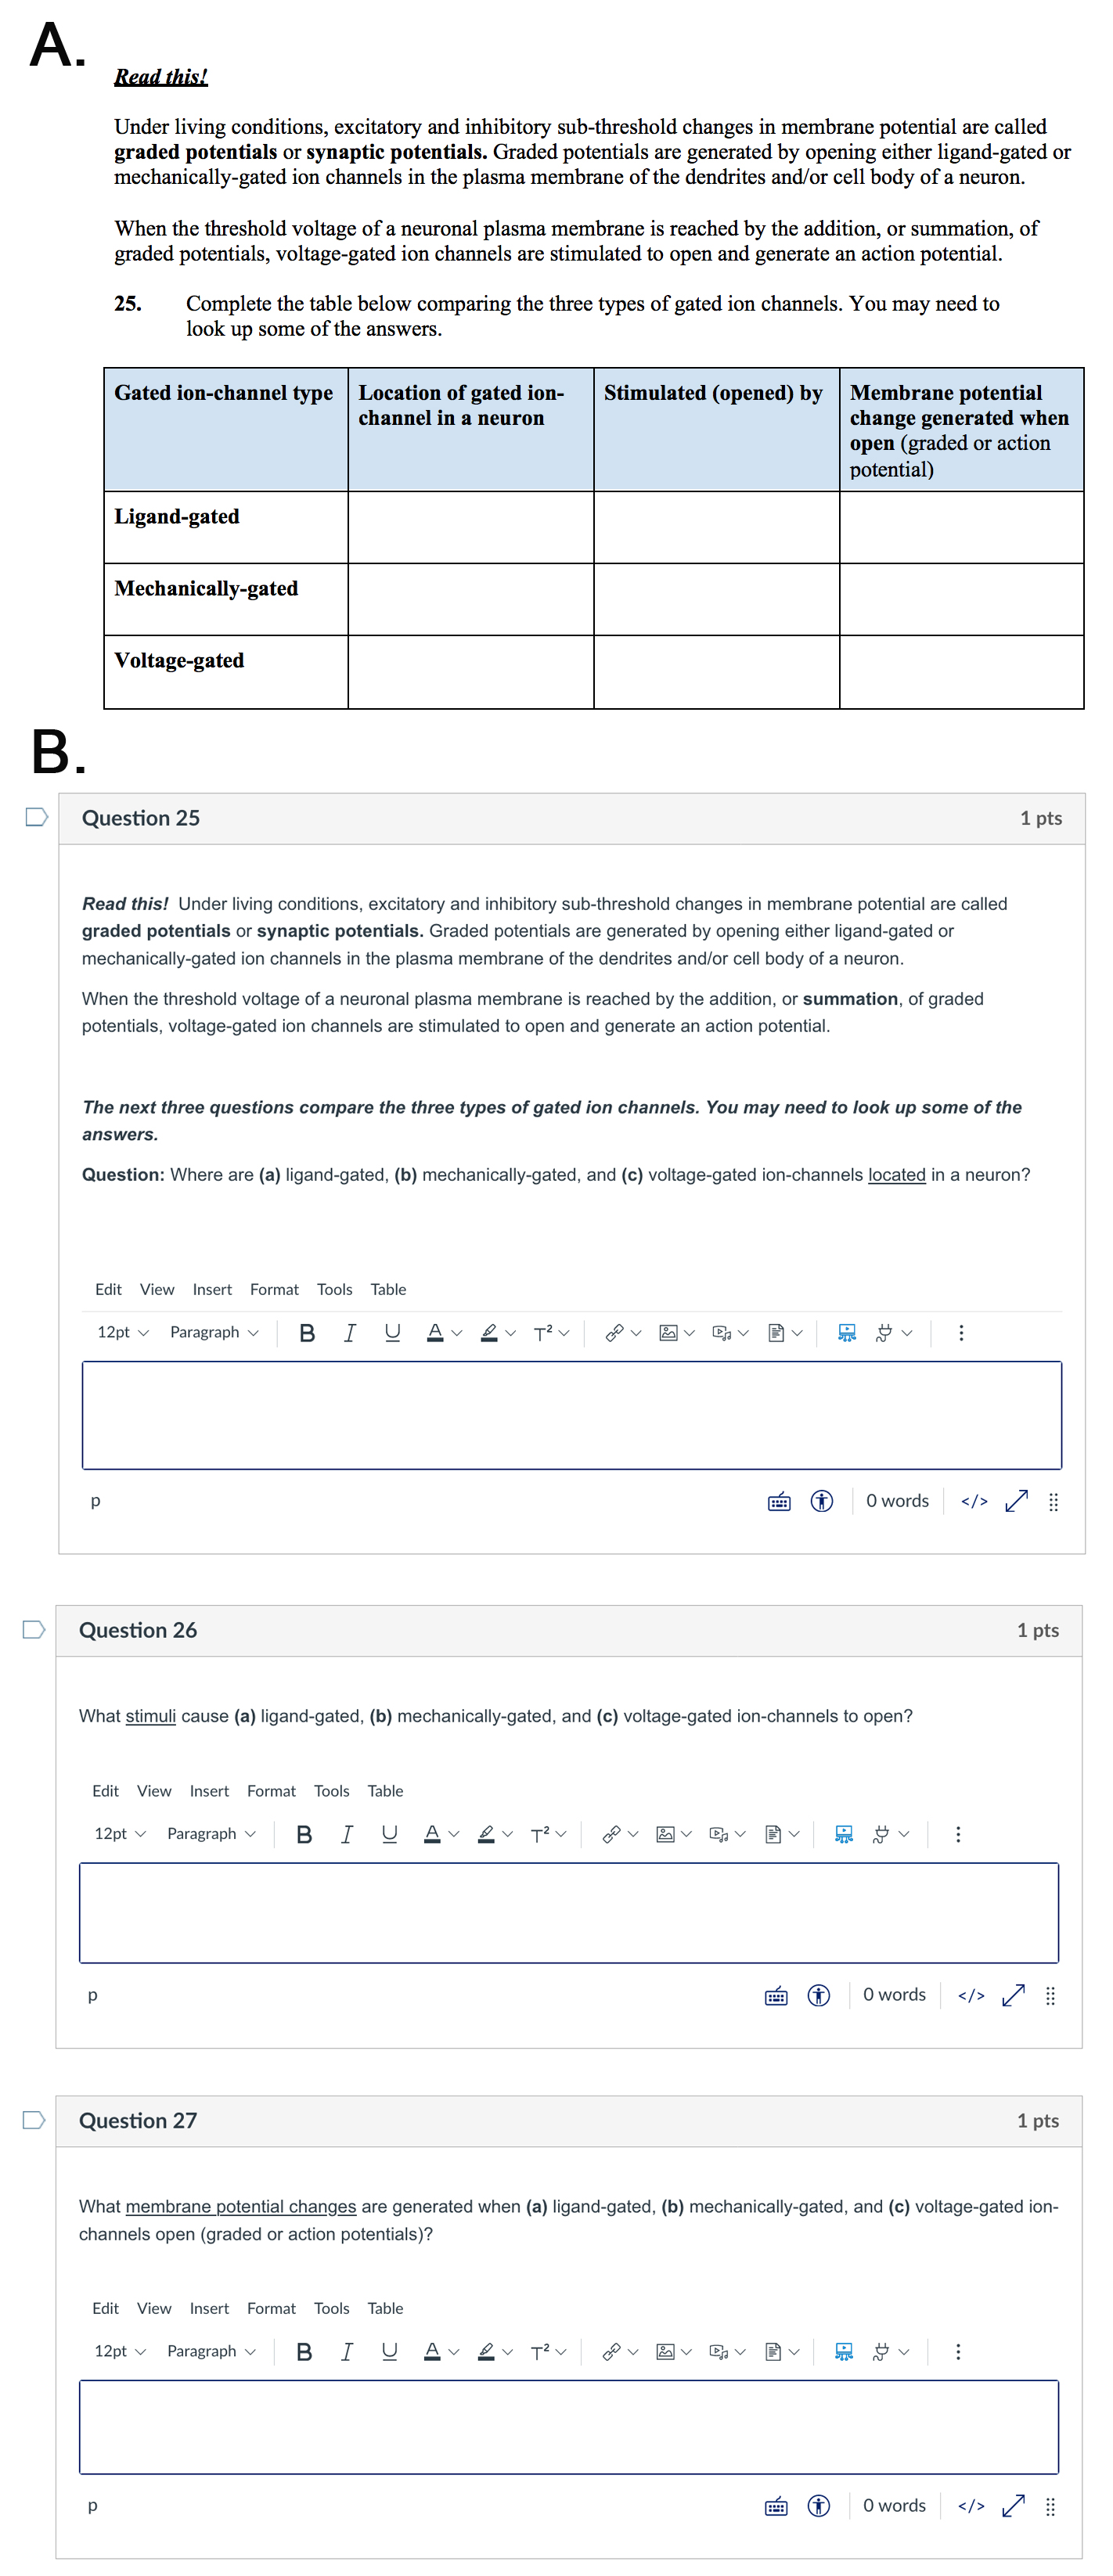 Figure 3. Some questions on paper worksheets are not directly compatible with available LMS question formats.